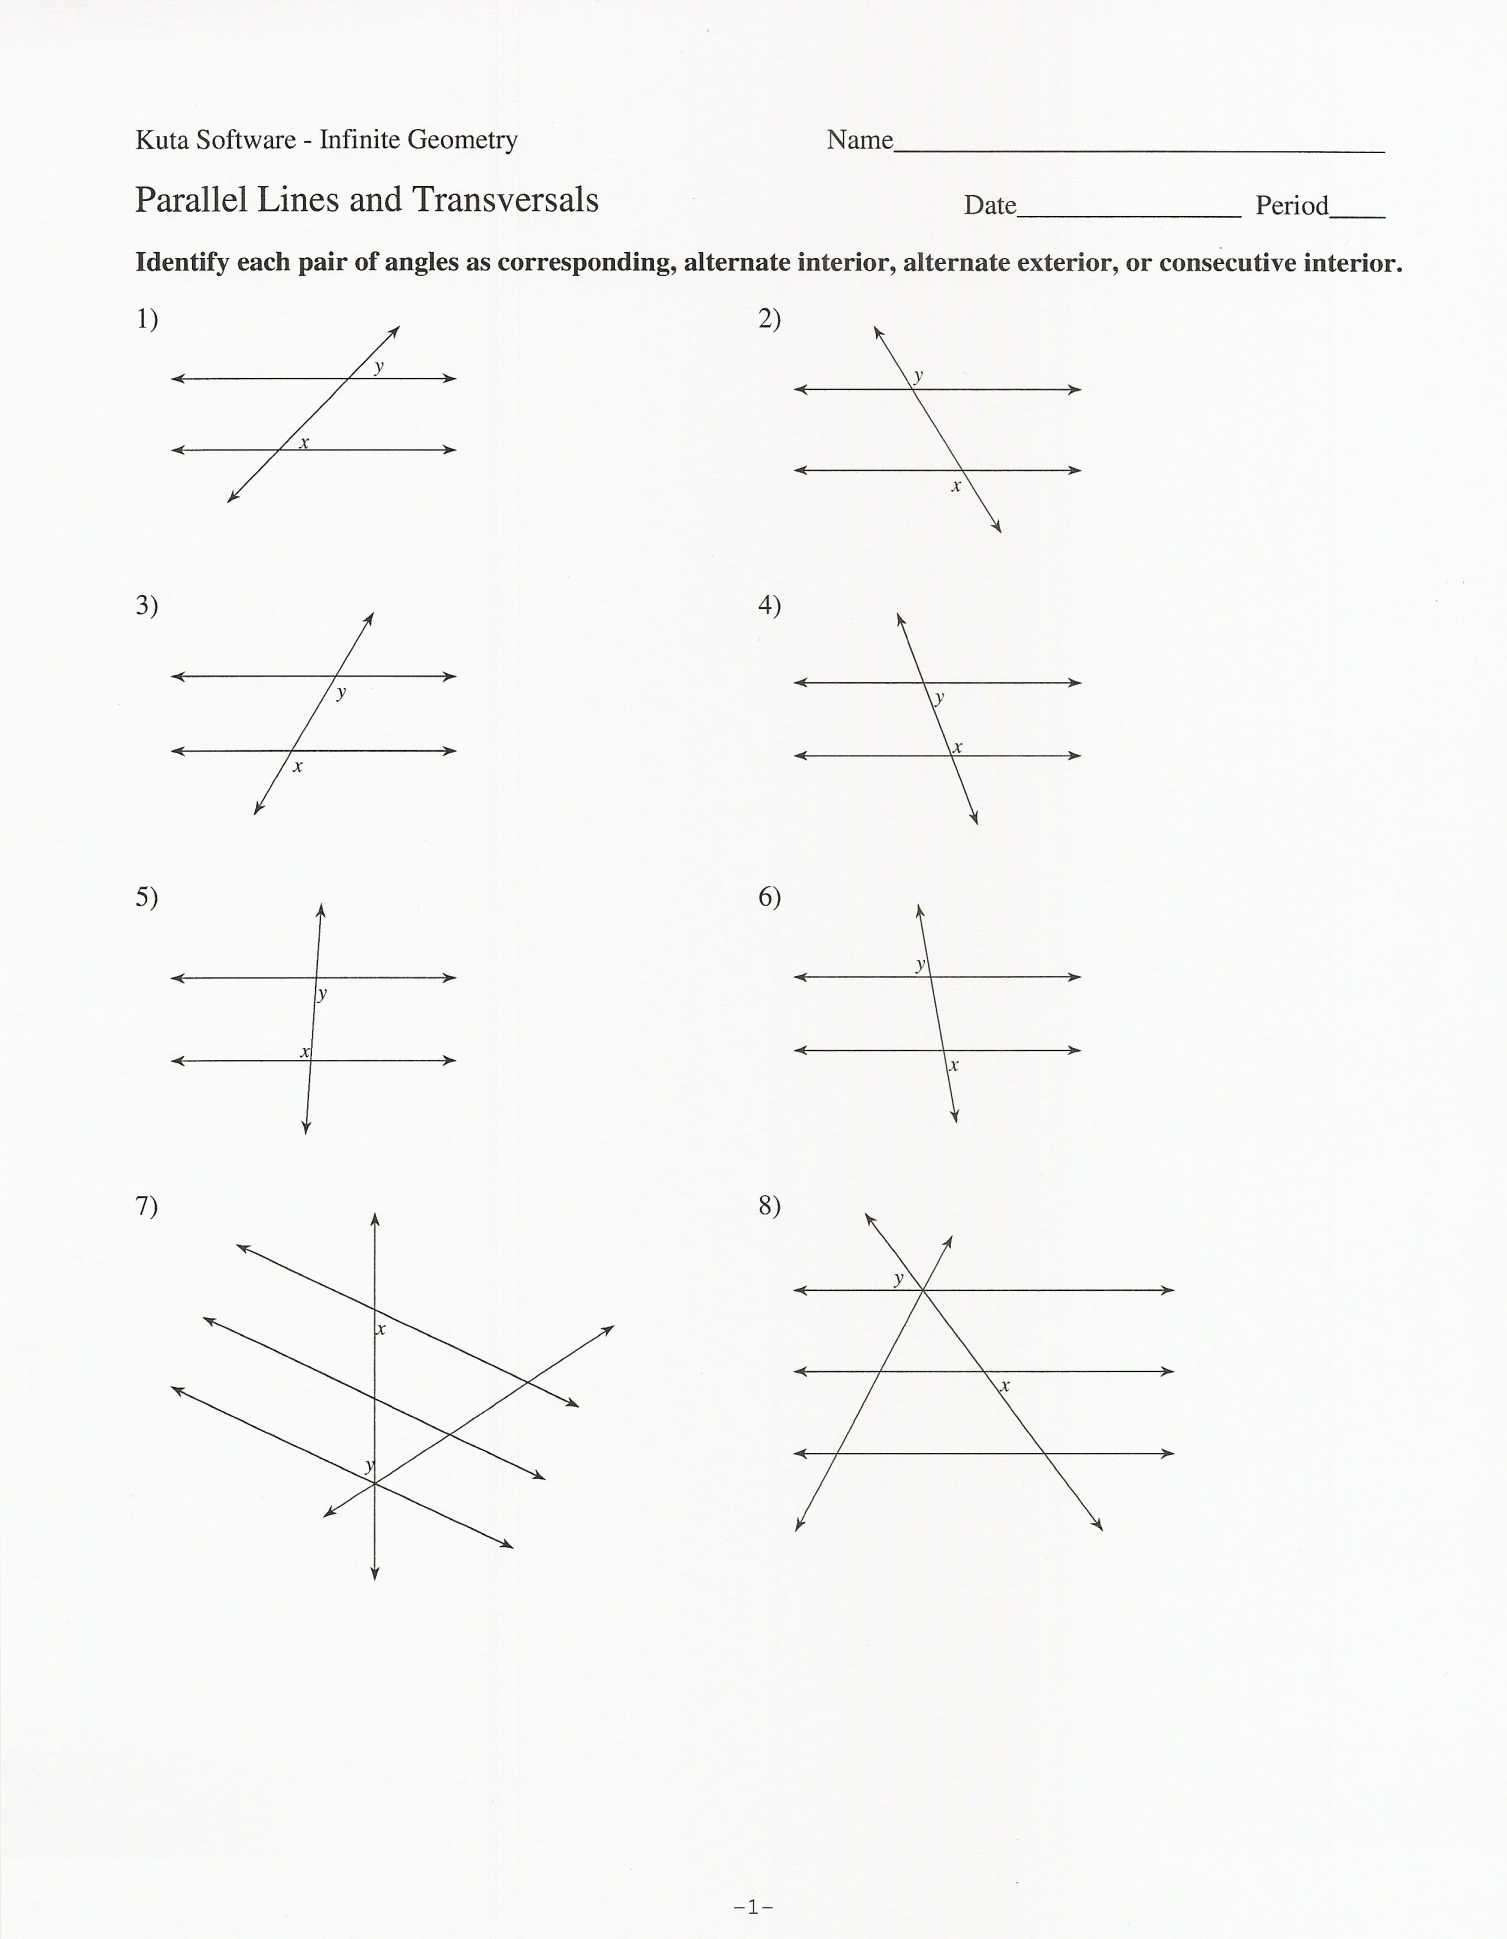 proving-triangle-congruence-worksheets